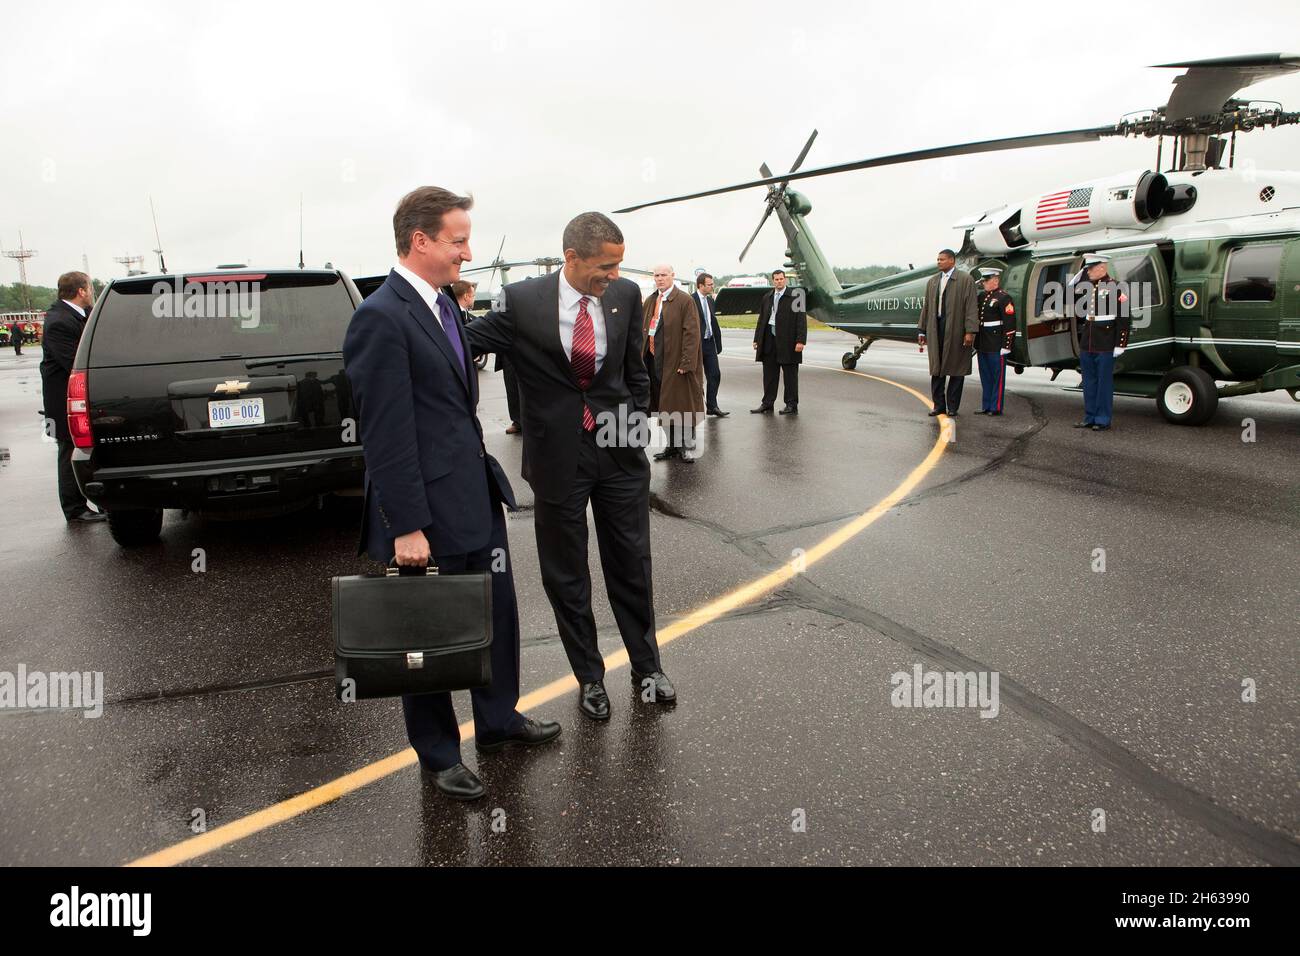 President Barack Obama and British Prime Minister David Cameron prepare to board Marine One at the Deerhurst Resort landing zone in Muskoka, Canada, following the conclusion of the G8 Summit, June 26, 2010. Stock Photo